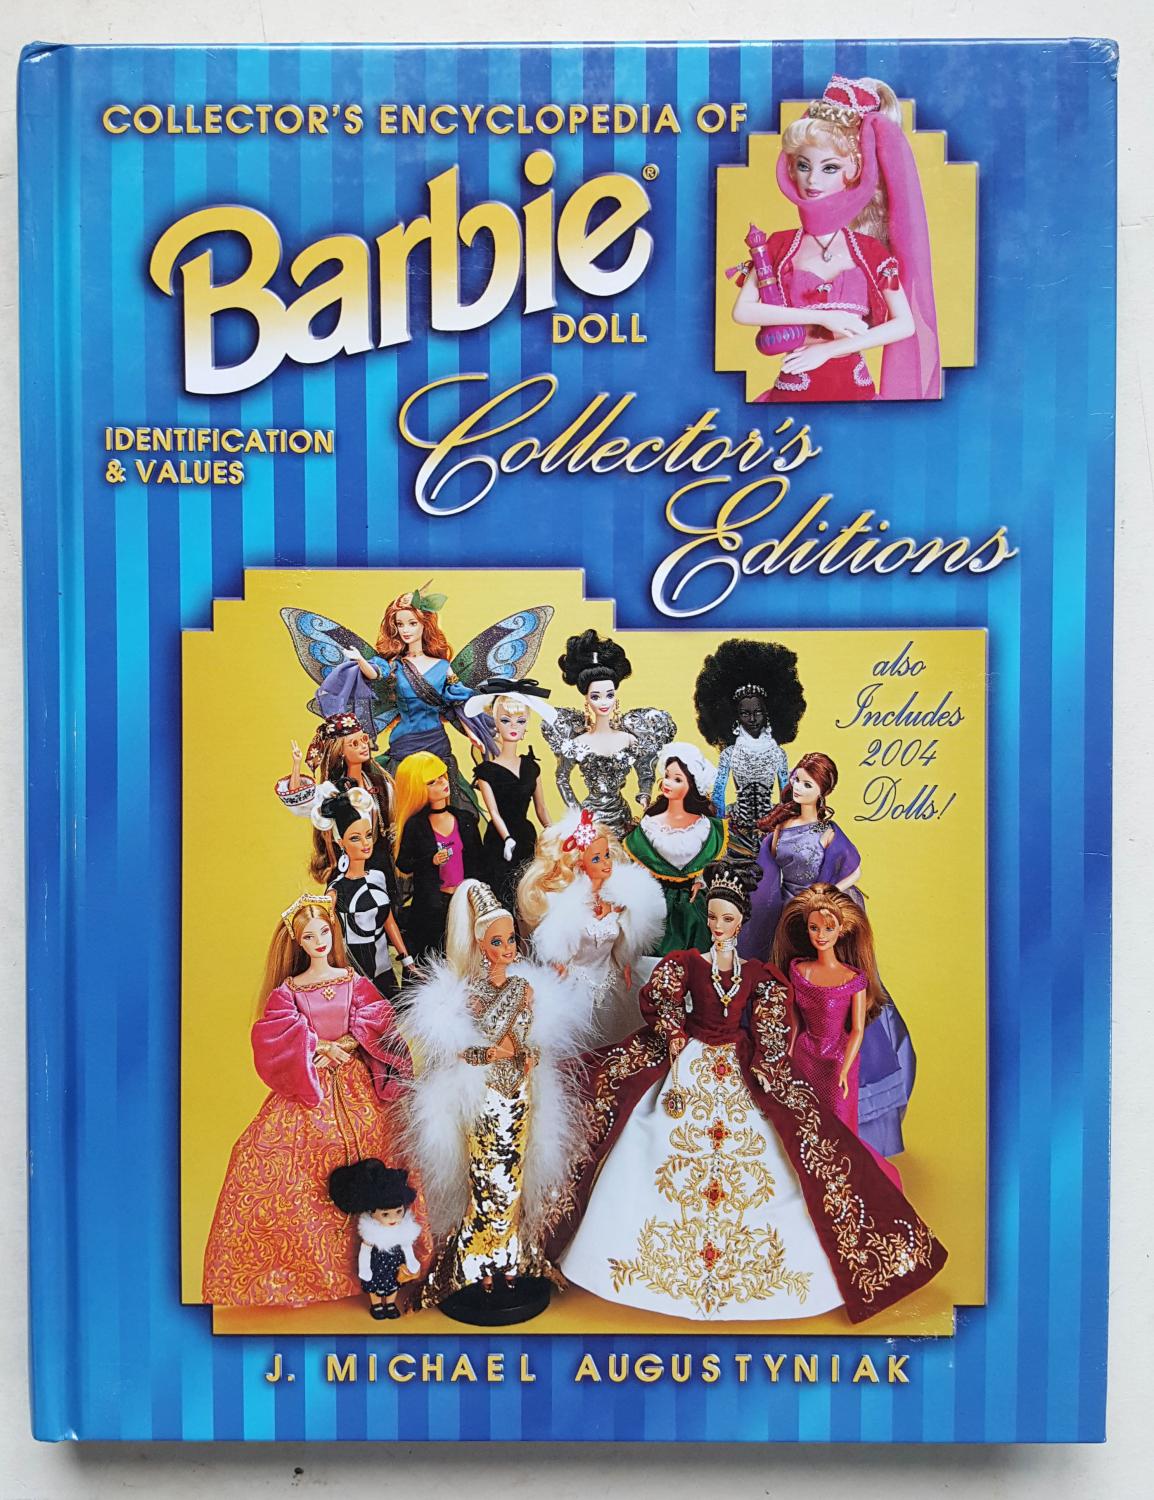 Kemiker Magtfulde aflevere Collector's Encyclopedia of Barbie Doll Collector's Editions:  Identification & Values by J. Michael Augustyniak: Near Fine Hardcover  (2005) | Shoestring Collectibooks